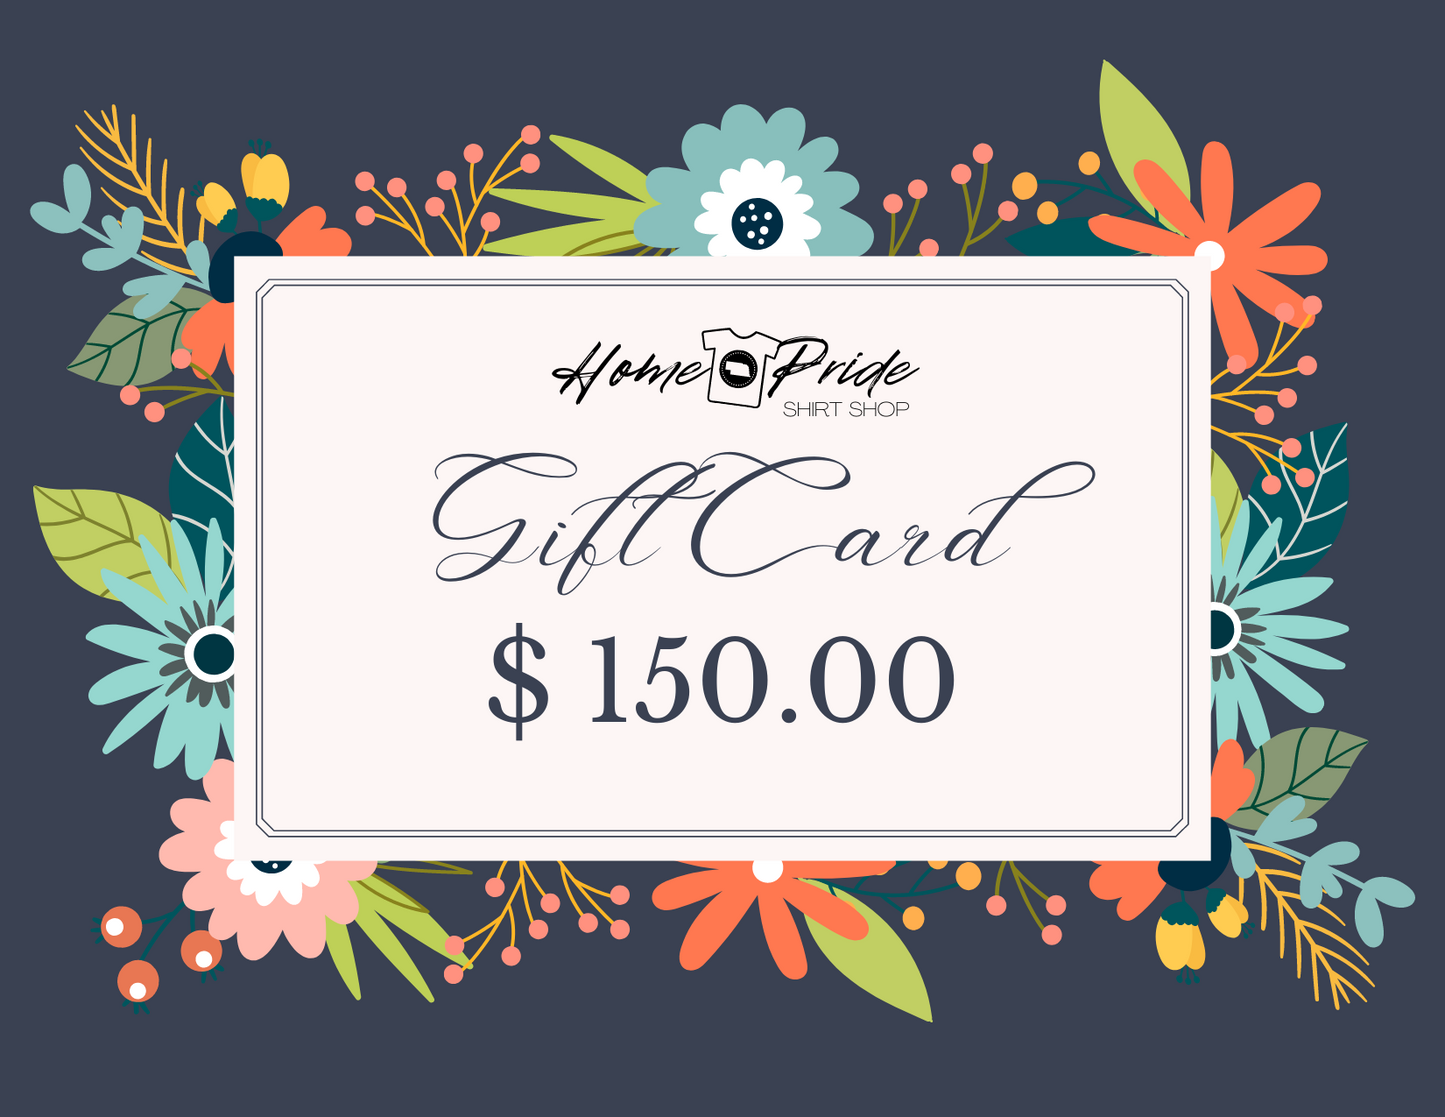 Home Pride Shirt Shop Gift Cards